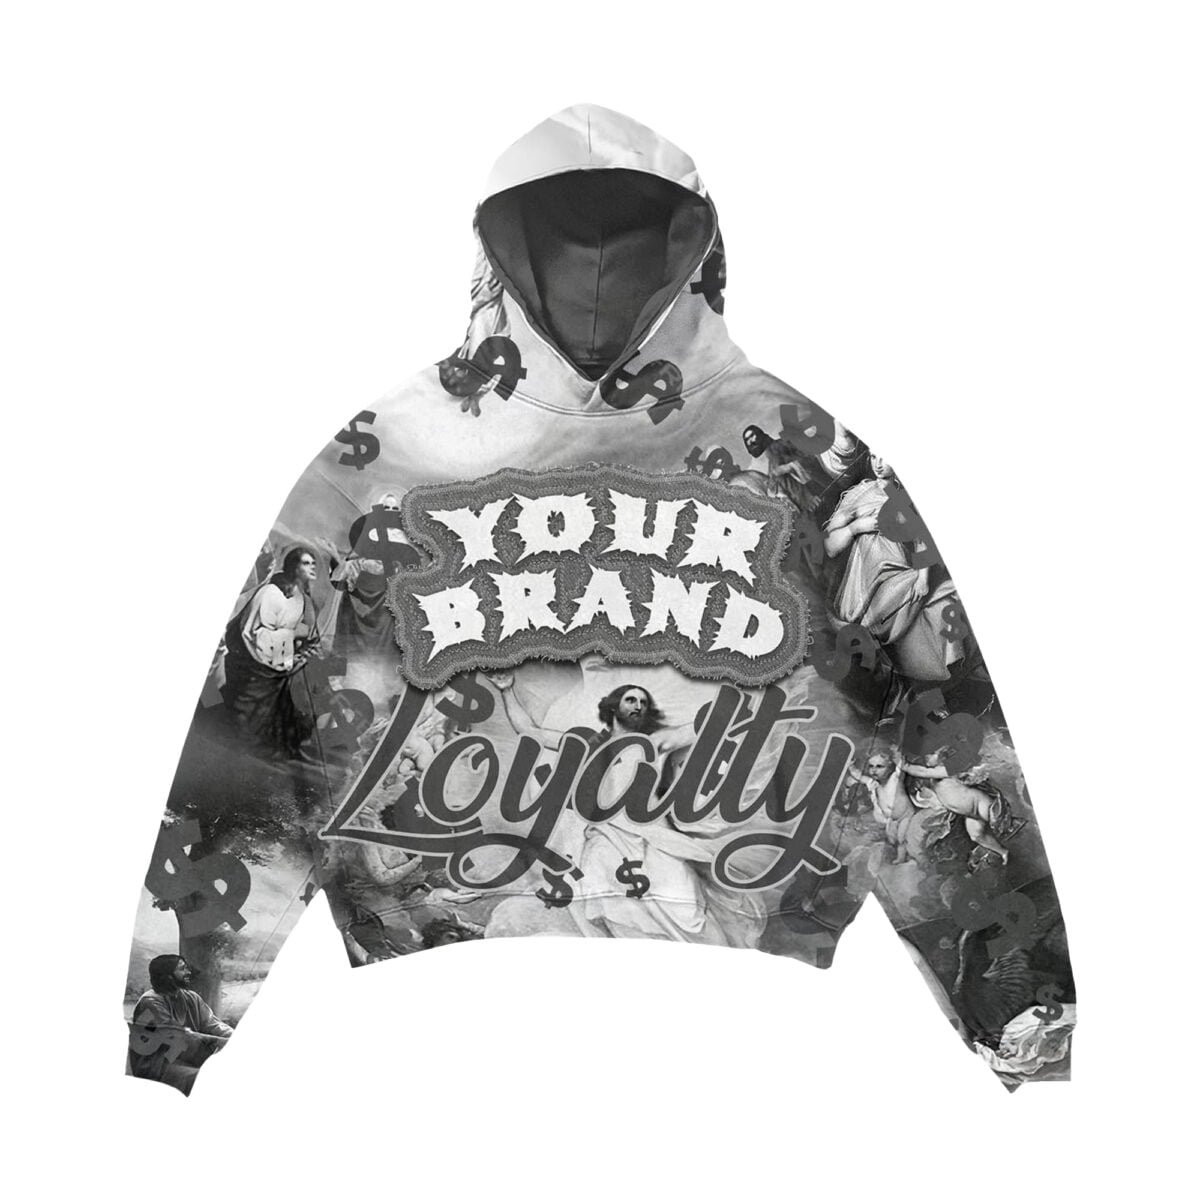 Fashionable heavy weight thick fleece cotton hoodie